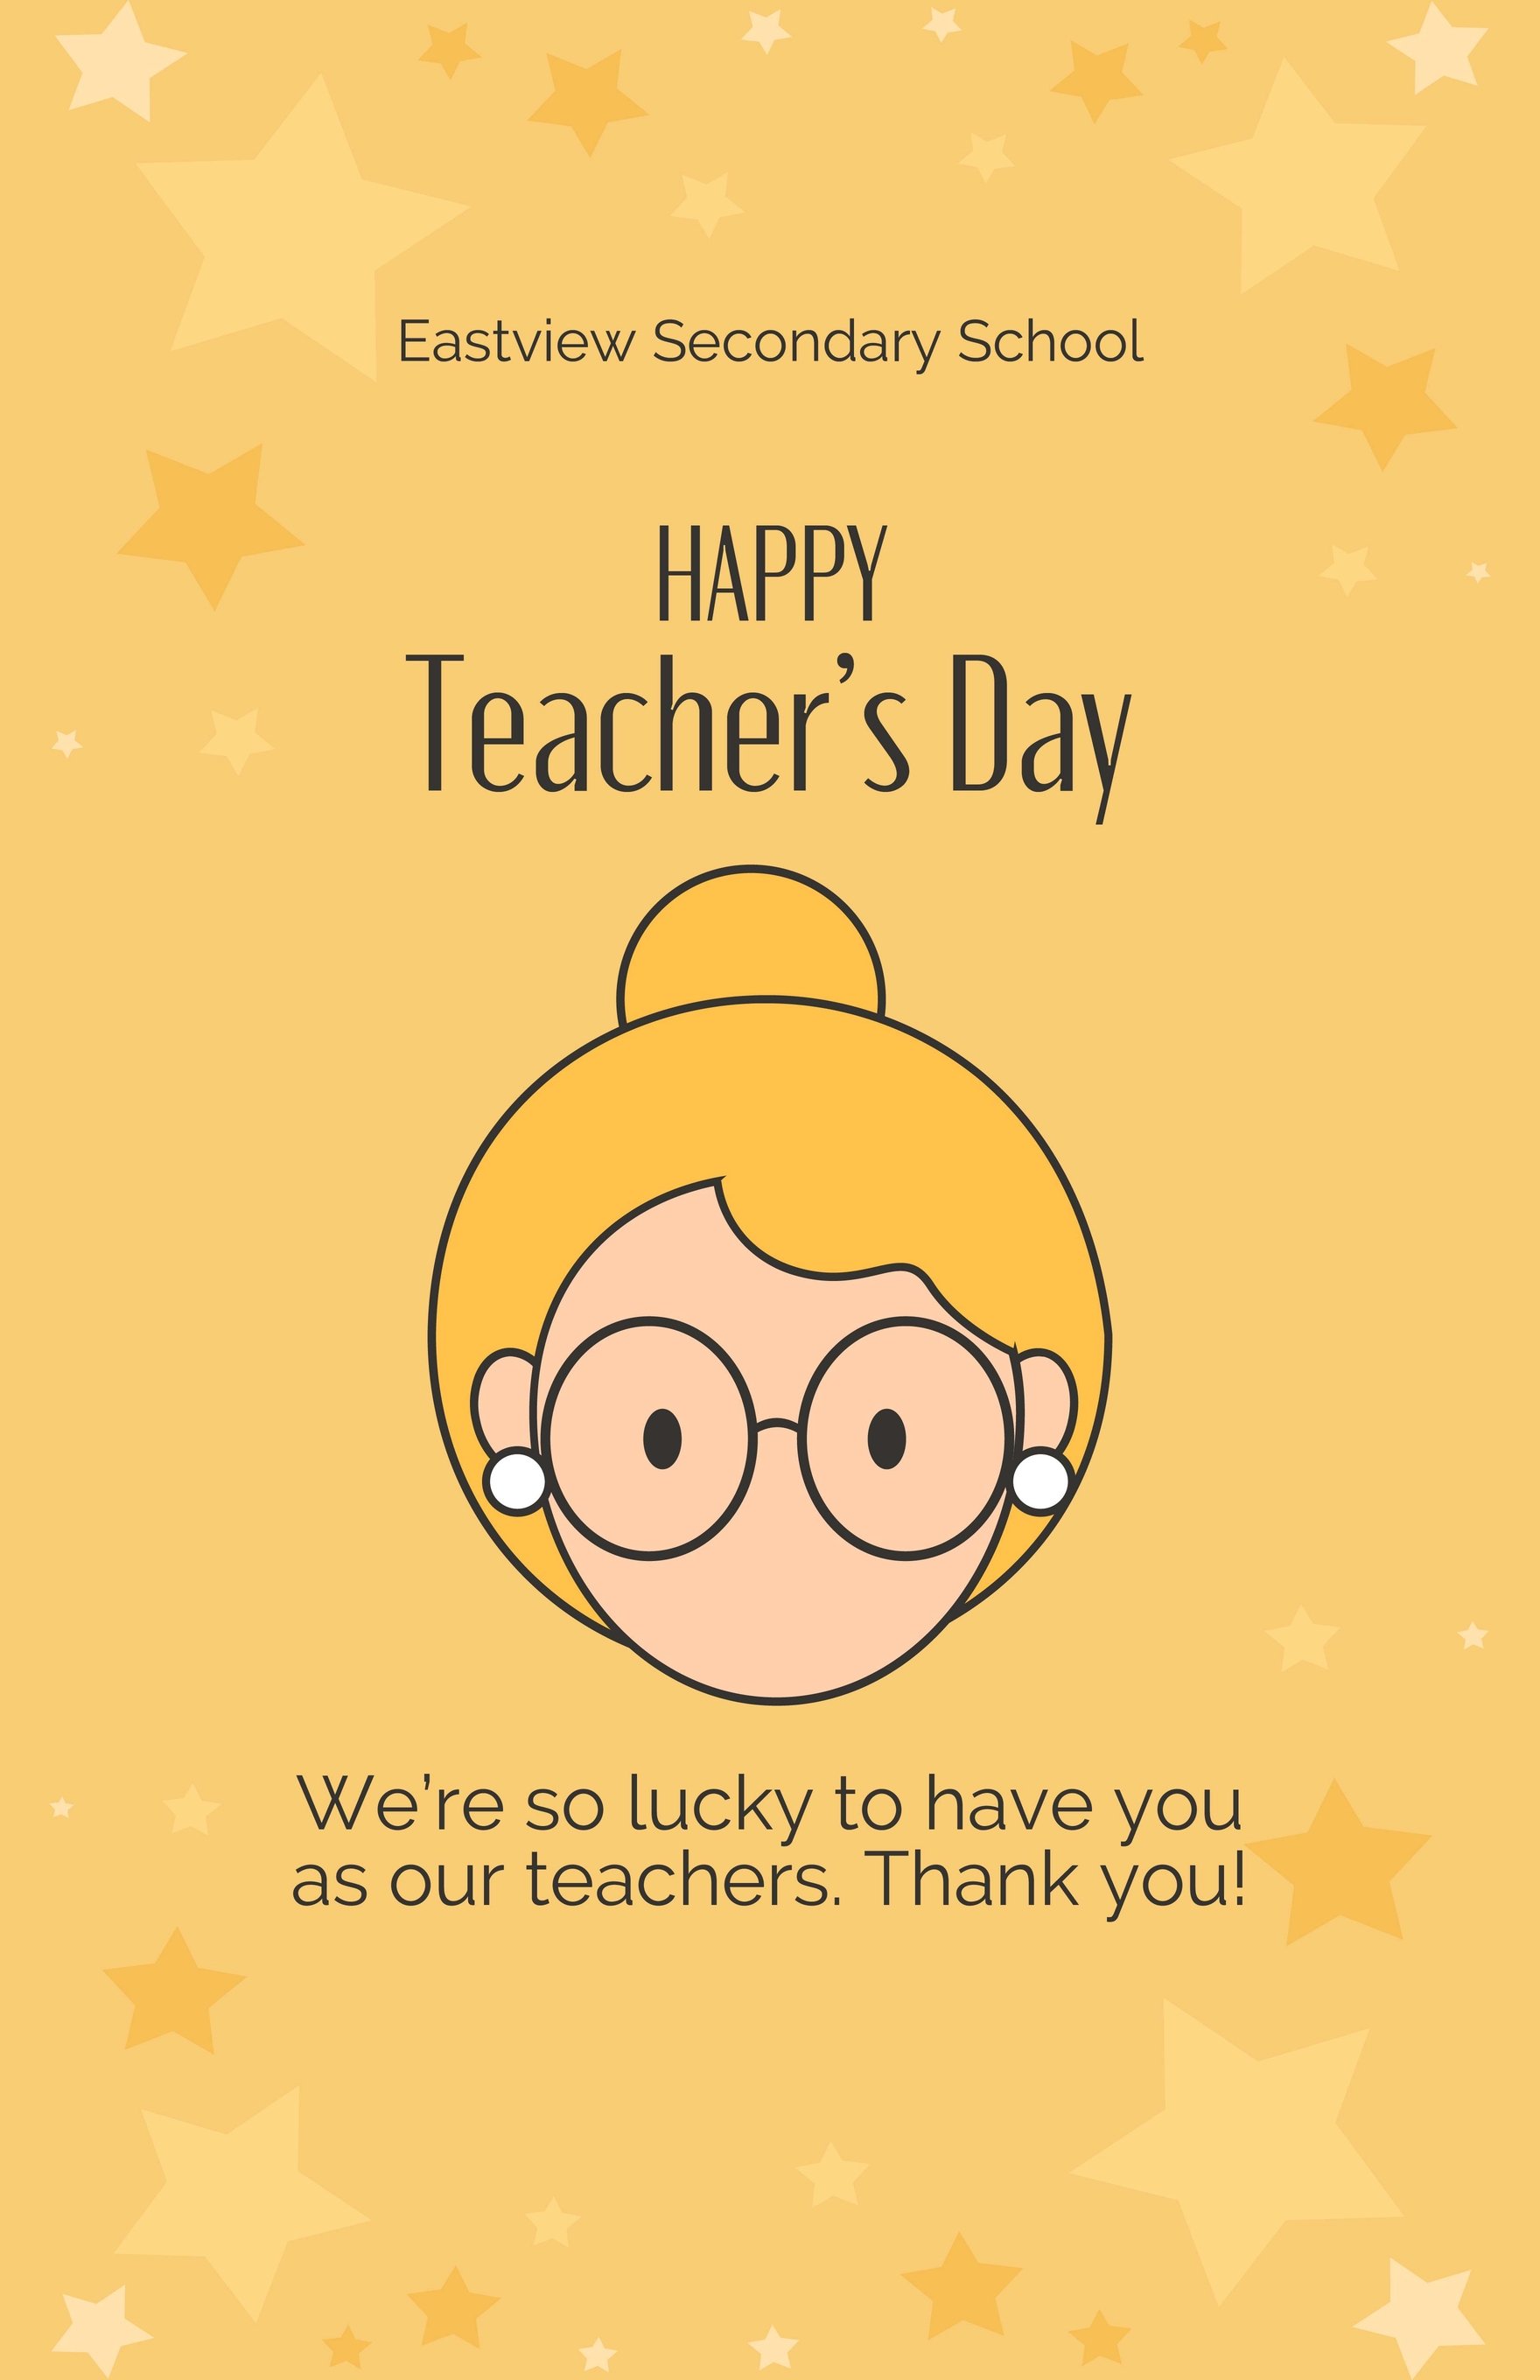 Teacher's Day Wishes Poster